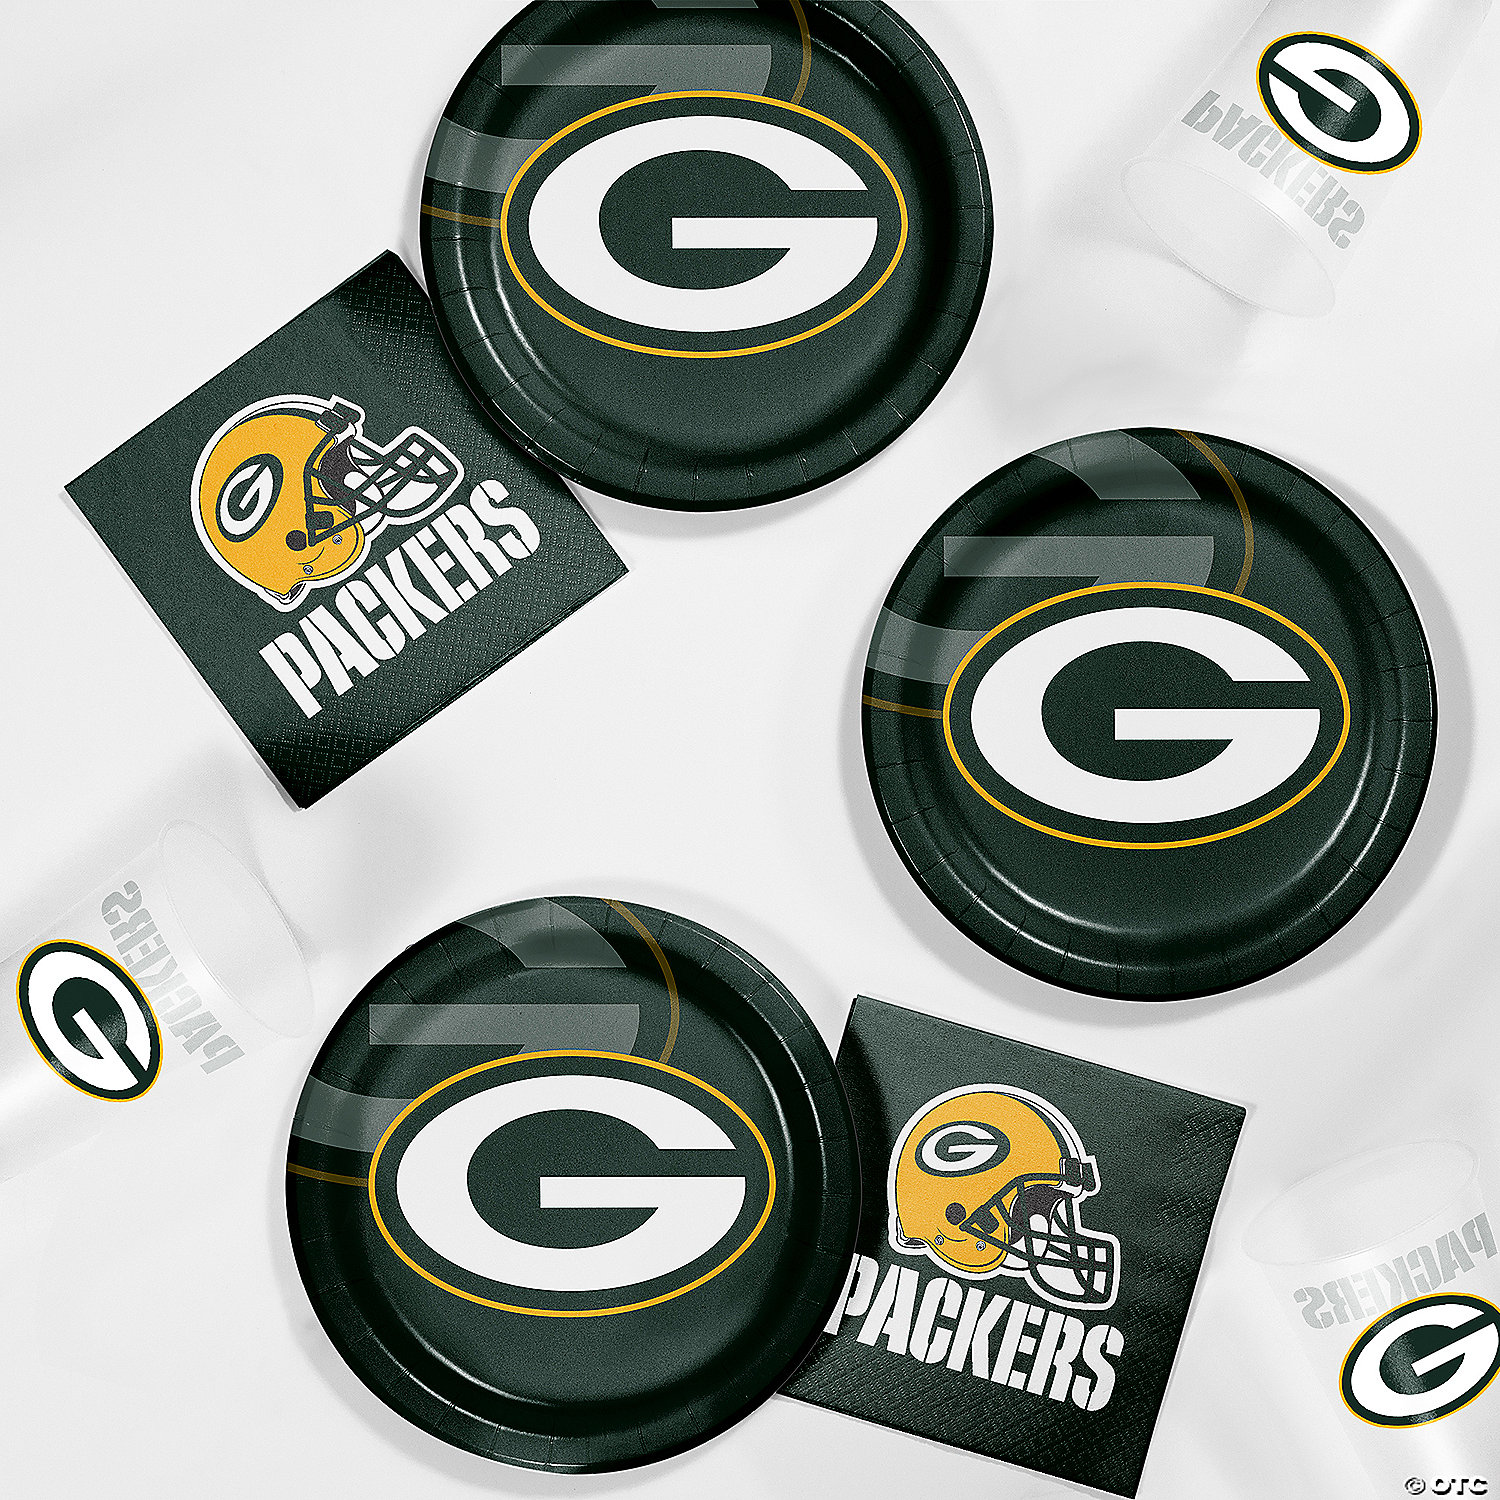 GameDay Novelties Packers Its A Party Tailgate Gift Set 